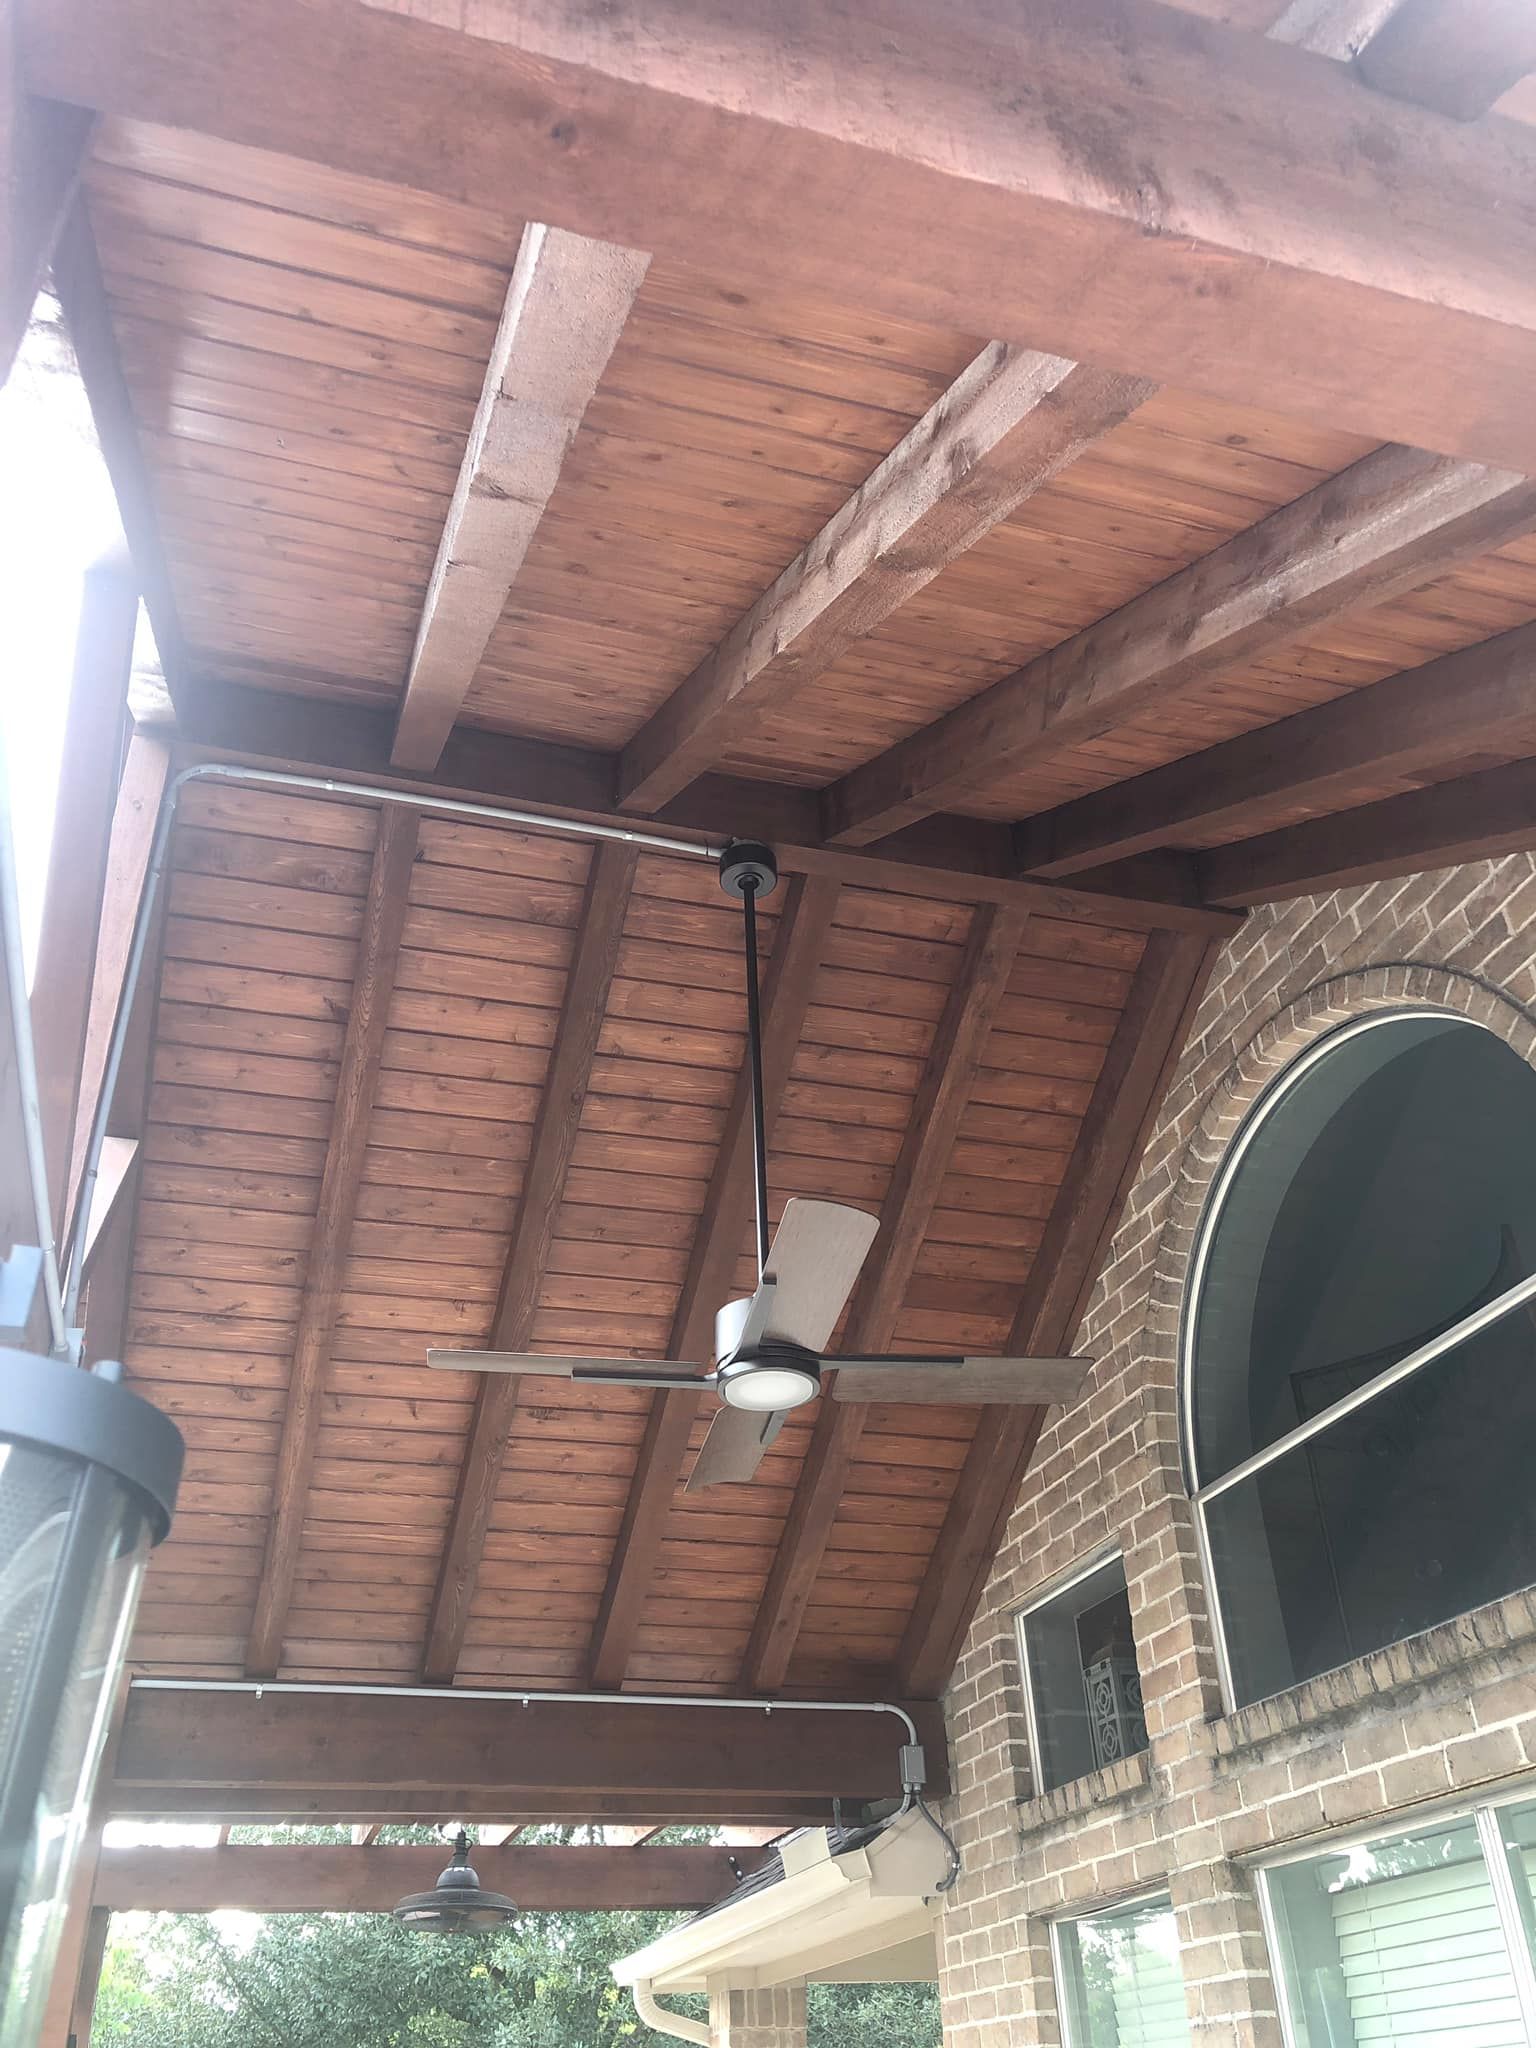 Wooden gable patio cover with blade fan